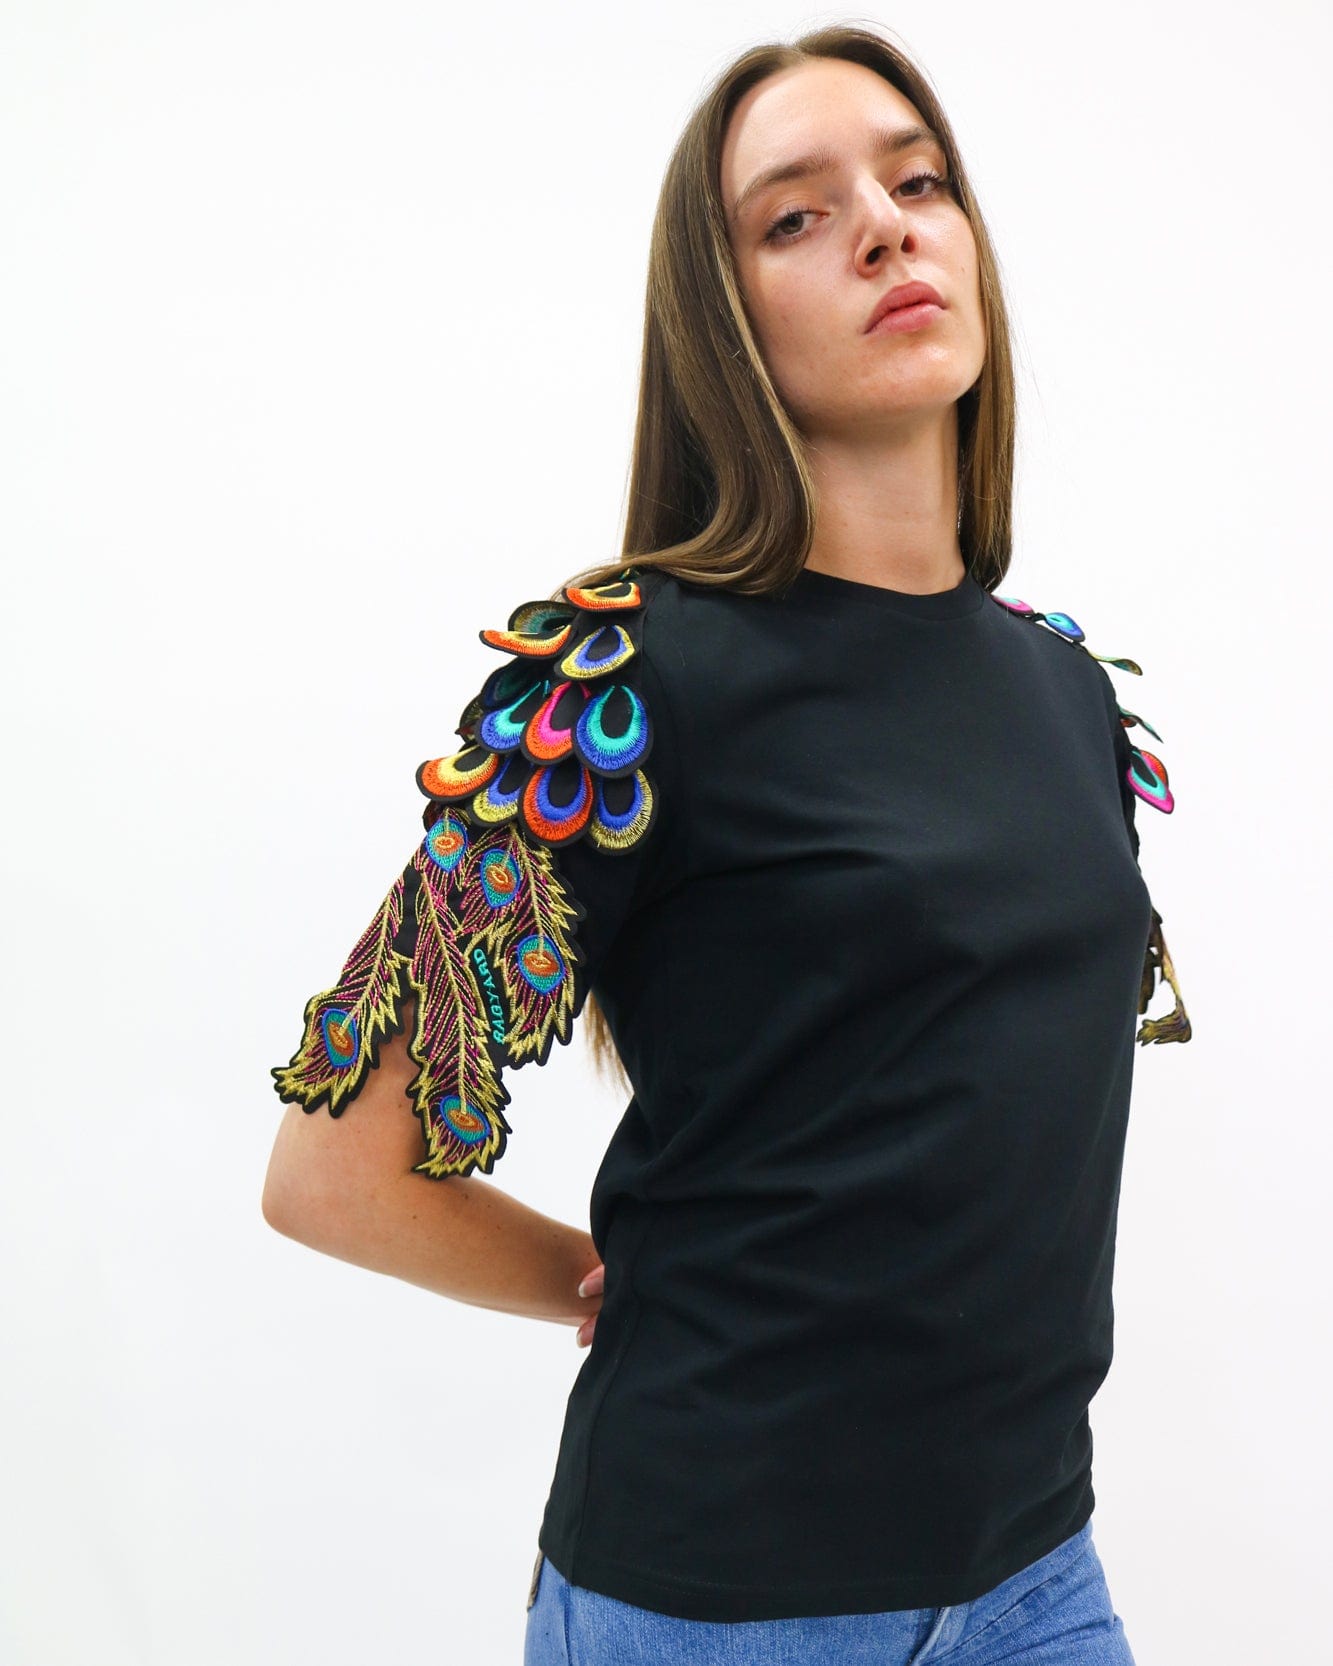 Evergreen - Black Psychedelic Peacock Patch T-Shirt